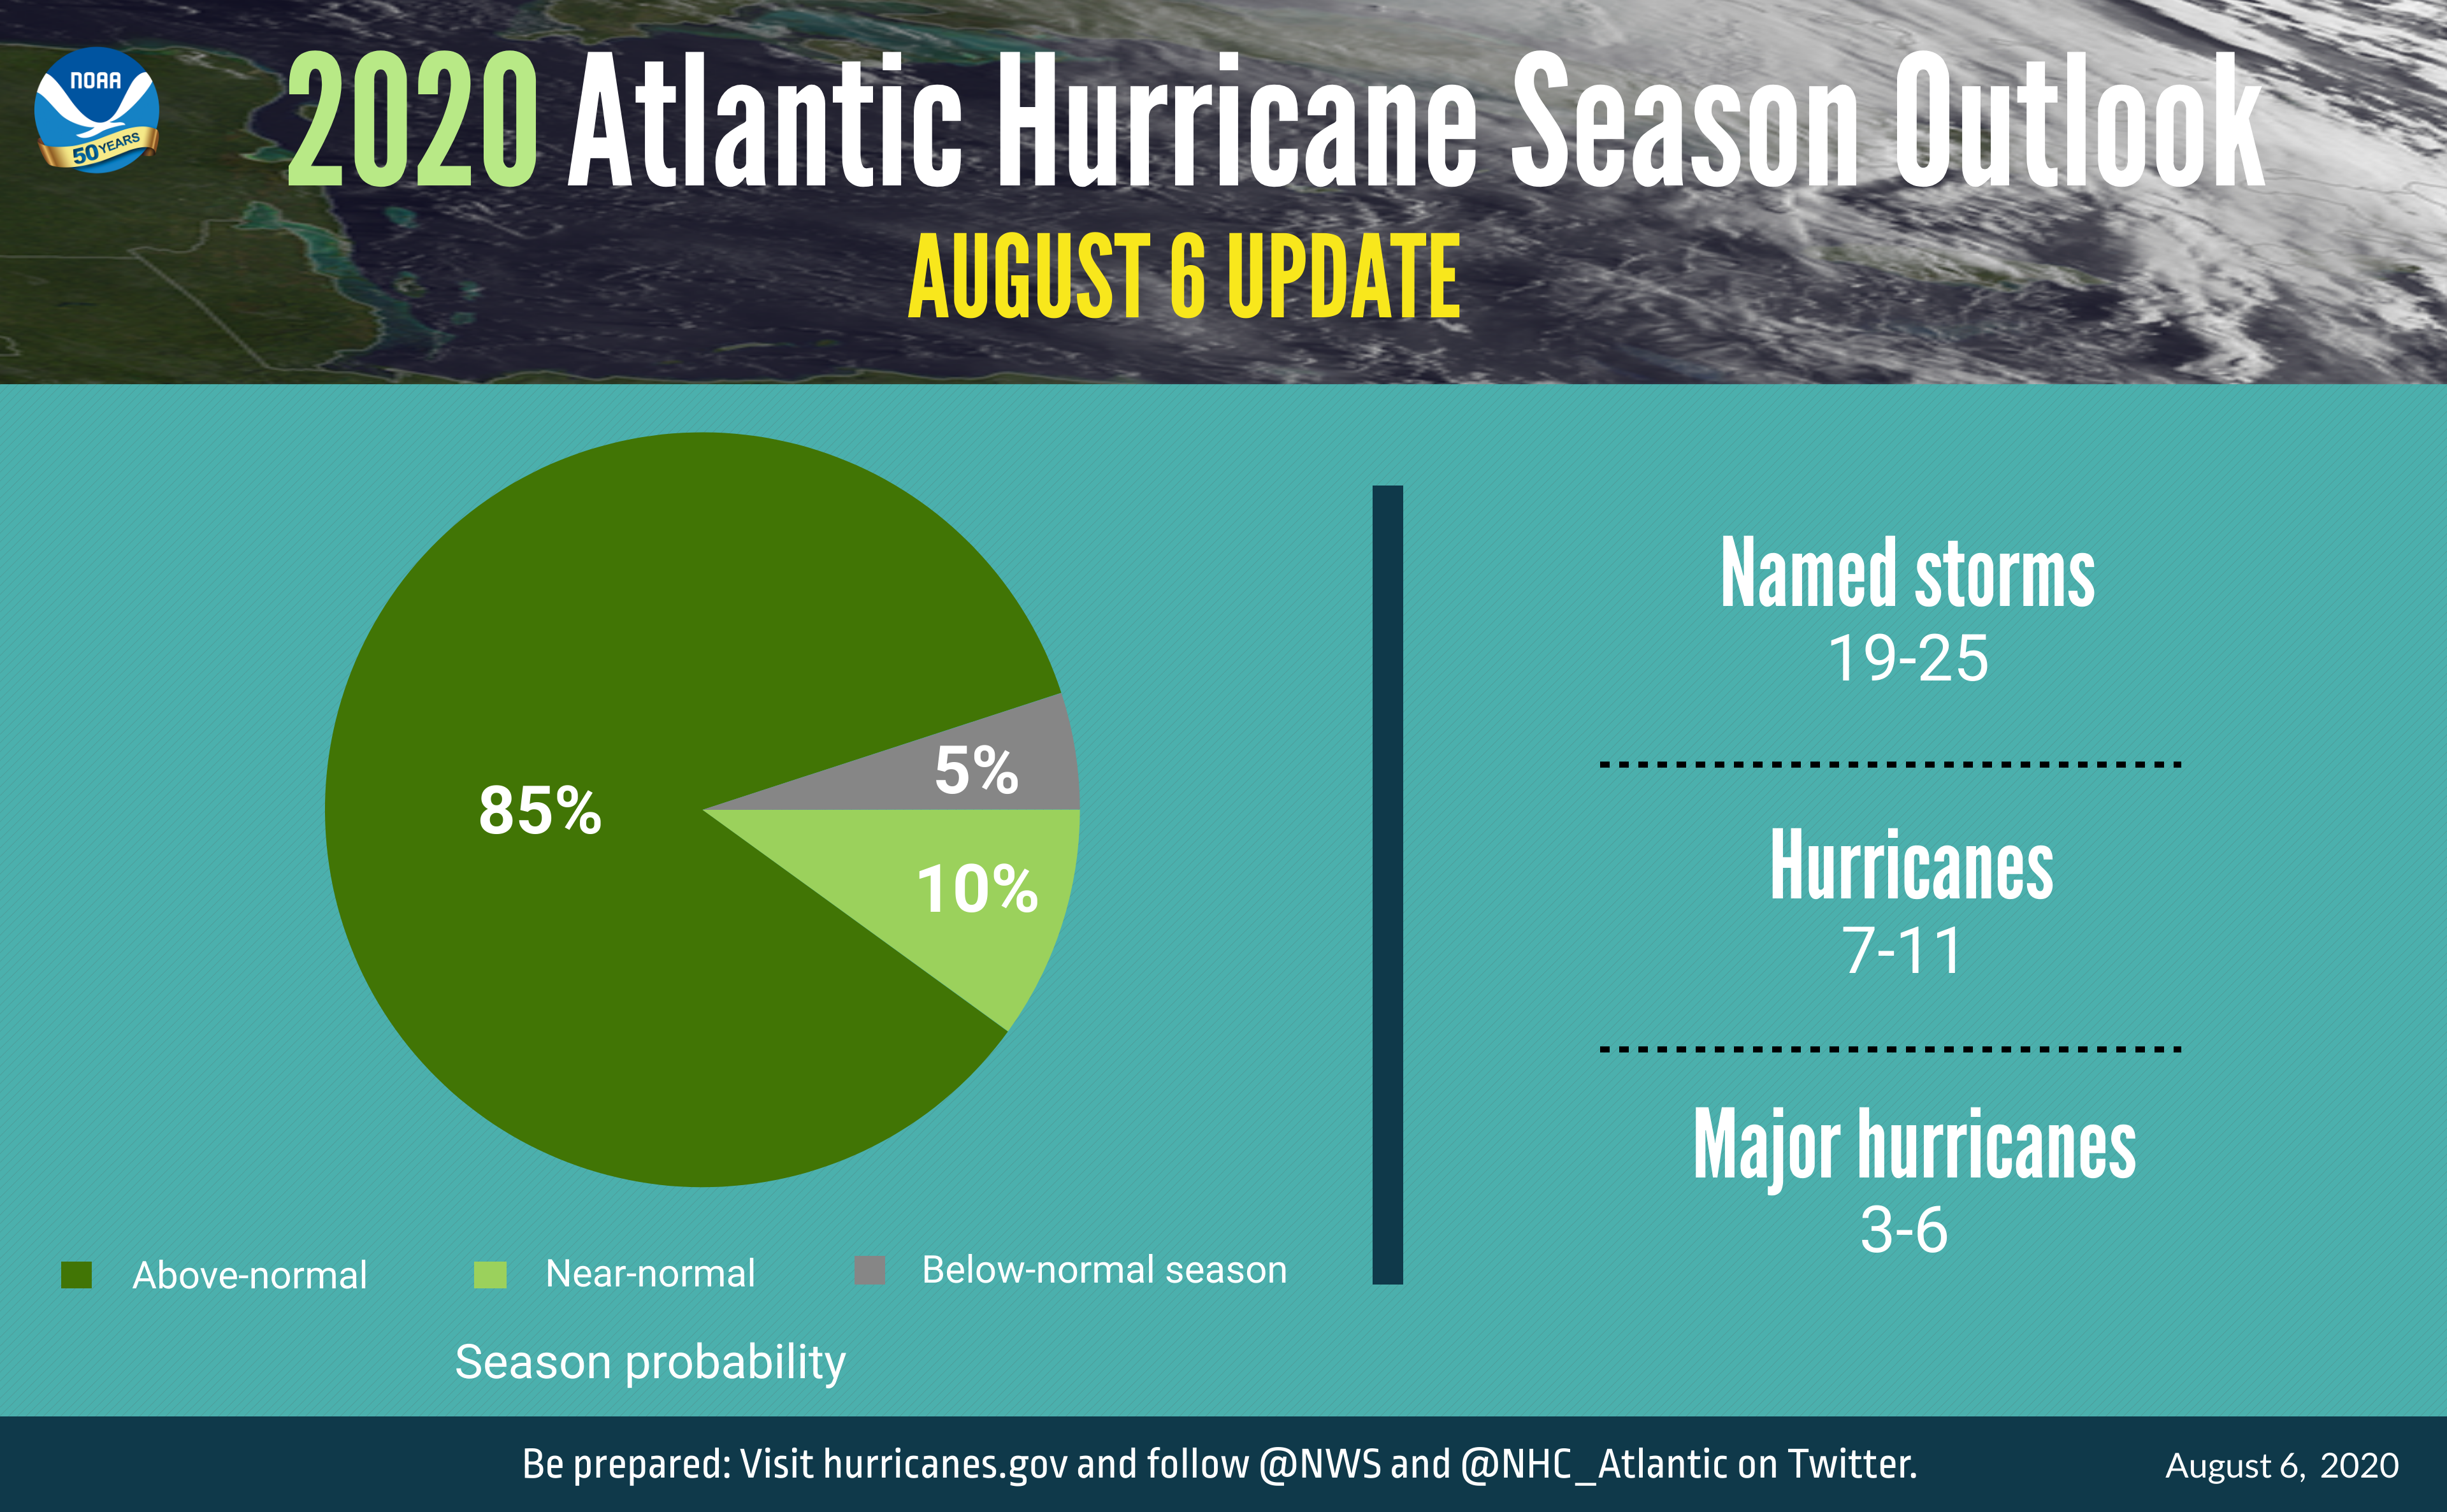 NOAA Updated Atlantic Hurricane Forecast to ‘Extremely Active’